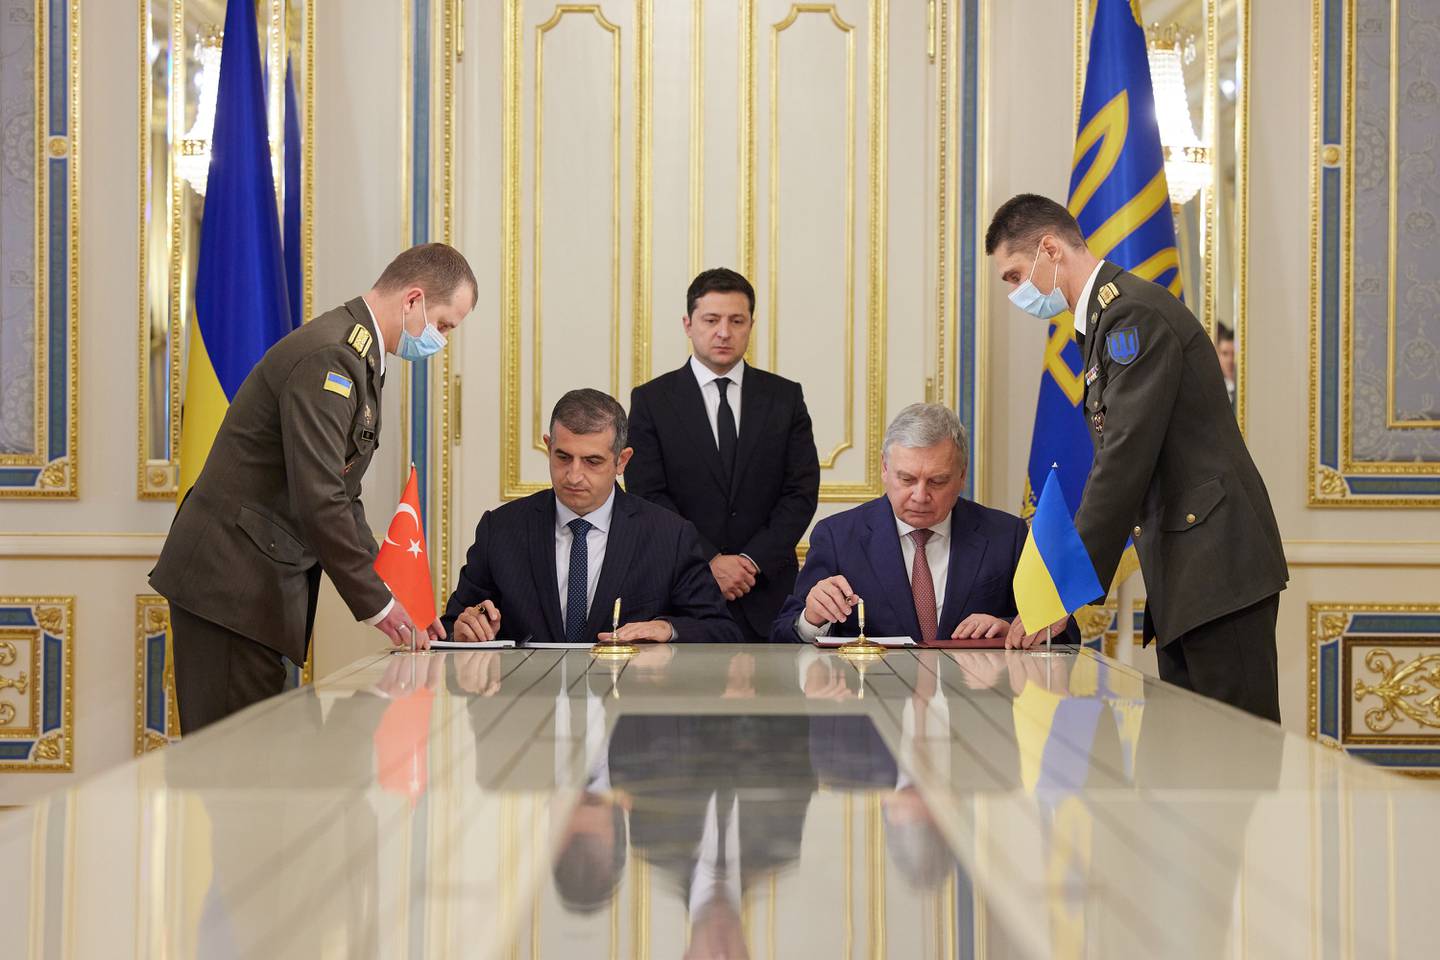 Ukraine's President Volodymyr Zelenskiy looks on while Defence Minister Andriy Taran and CEO of the Turkish defence technology company Baykar Haluk Bayraktar sign a memorandum to establish joint training and maintenance centres for Turkish armed drones in Kiev. Reuters